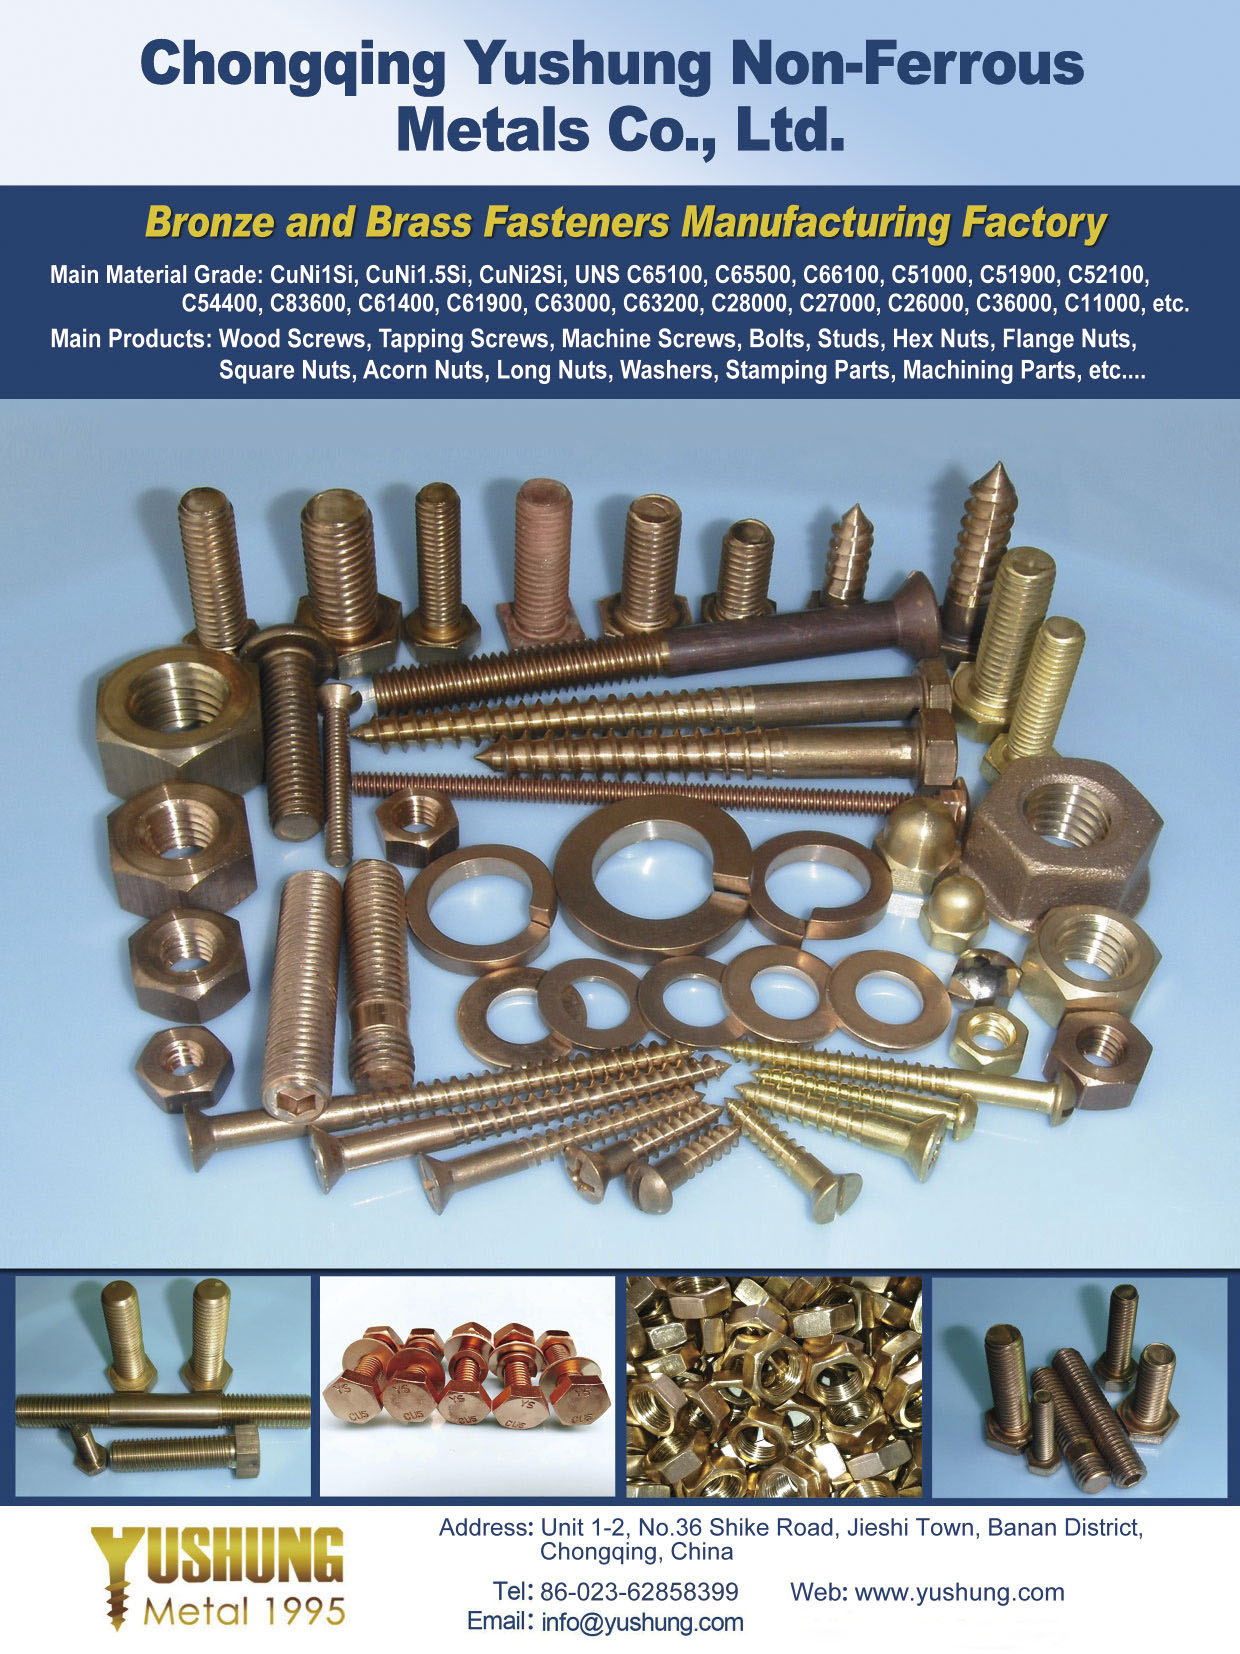 Chongqing Yushung Non-Ferrous Metals Co., Ltd. , Wood Screws, Tapping Screws, Machine Screws, Bolts, Studs, Hex Nuts, Flange Nuts, Square Nuts, Acorn Nuts, Long Nuts, Washers, Stamping Parts, Machining Parts, etc....